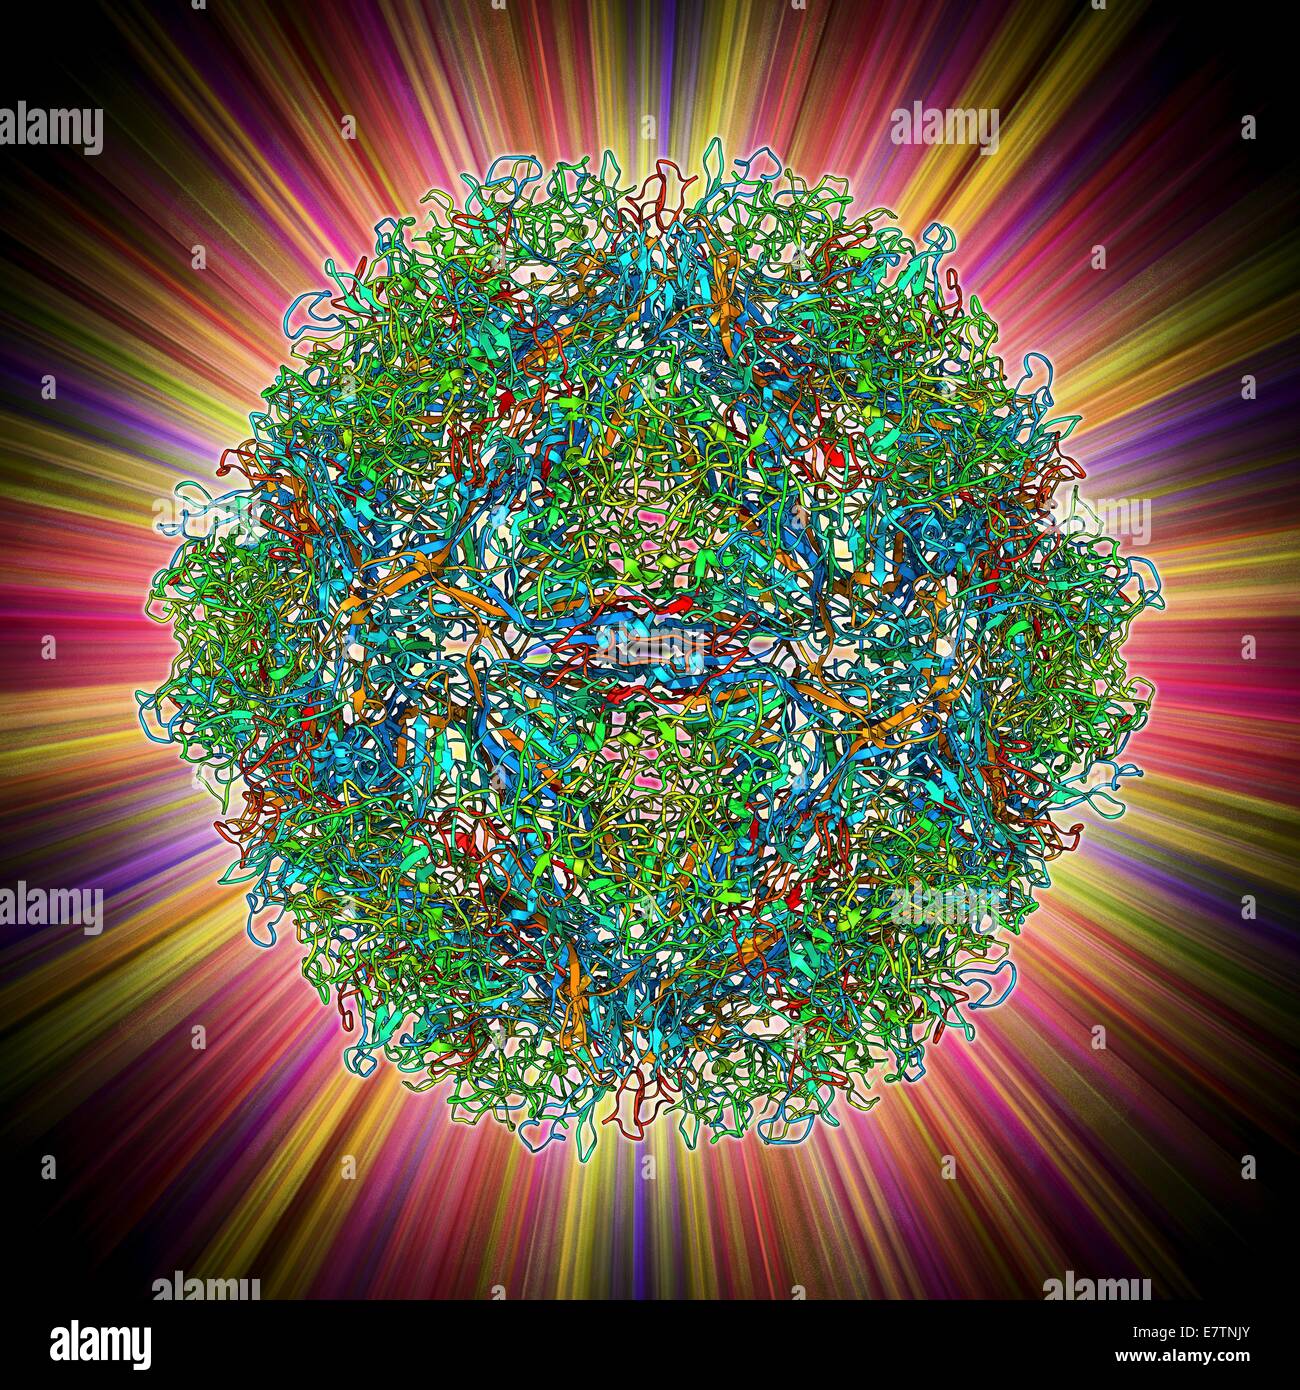 Parvovirus particle. Molecular model showing the structure of the capsid (outer protein coat) of a human parvovirus (family Parvoviridae) particle. Parvoviridae viruses include the smallest known viruses and some of the most environmentally resistant. Eac Stock Photo